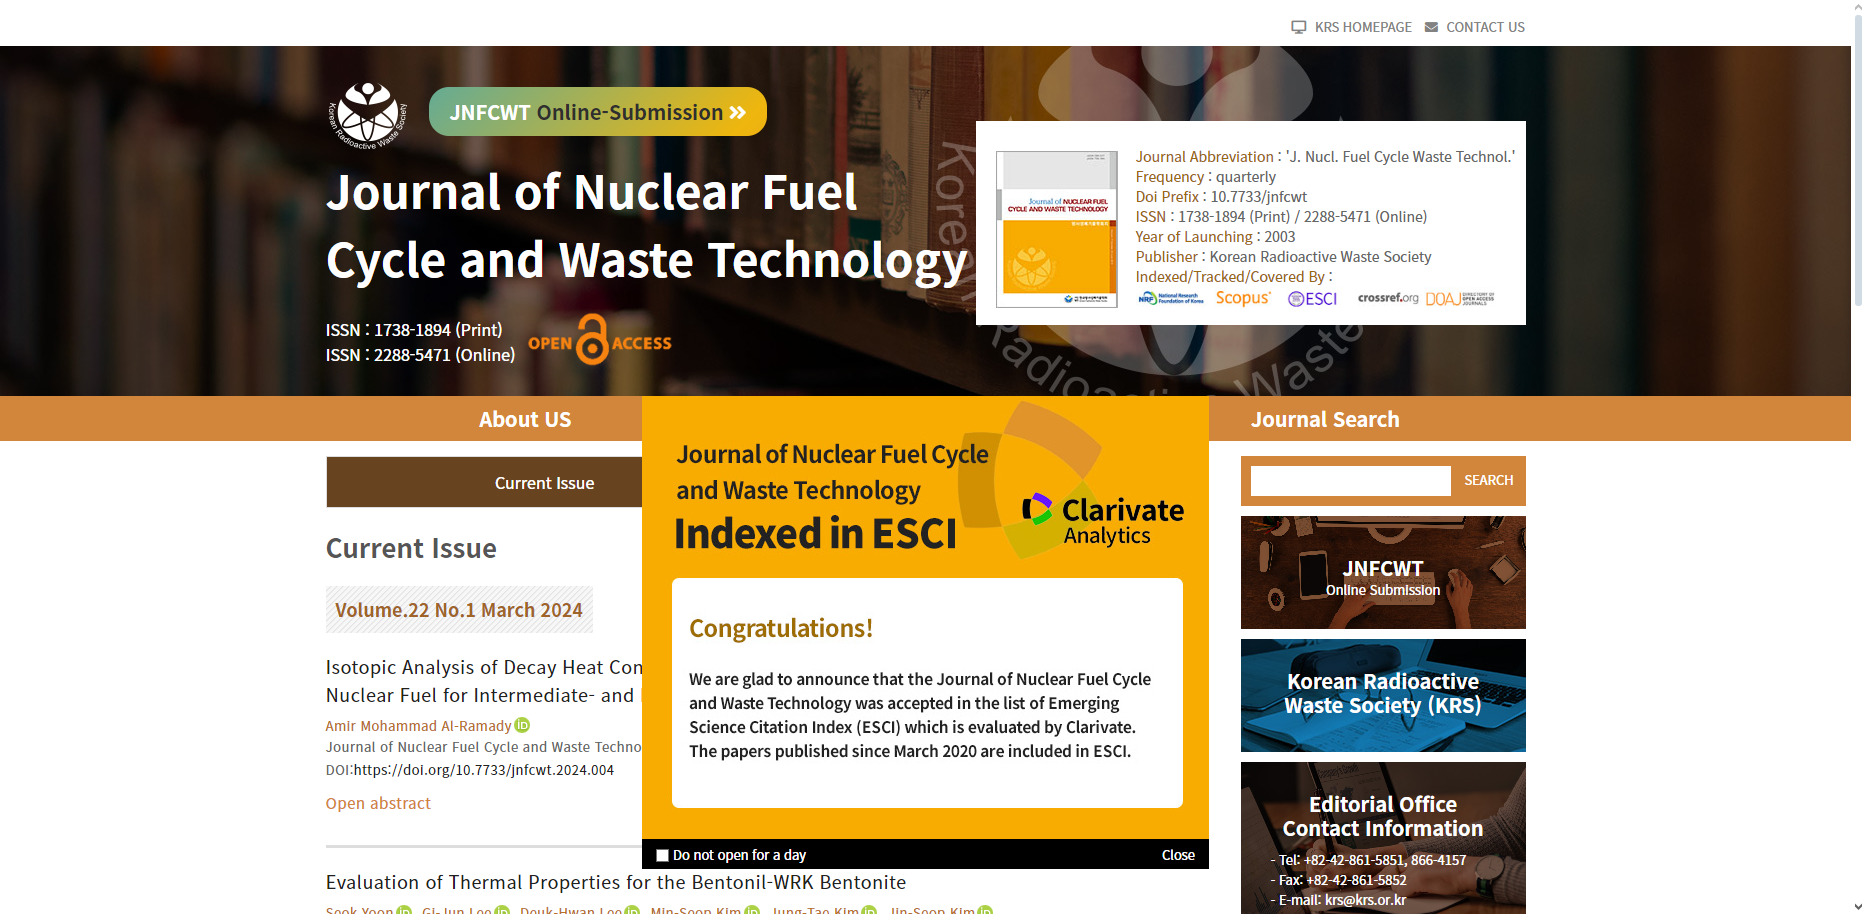 Journal of Nuclear Fuel Cycle and Waste Technology (JNFCWT)